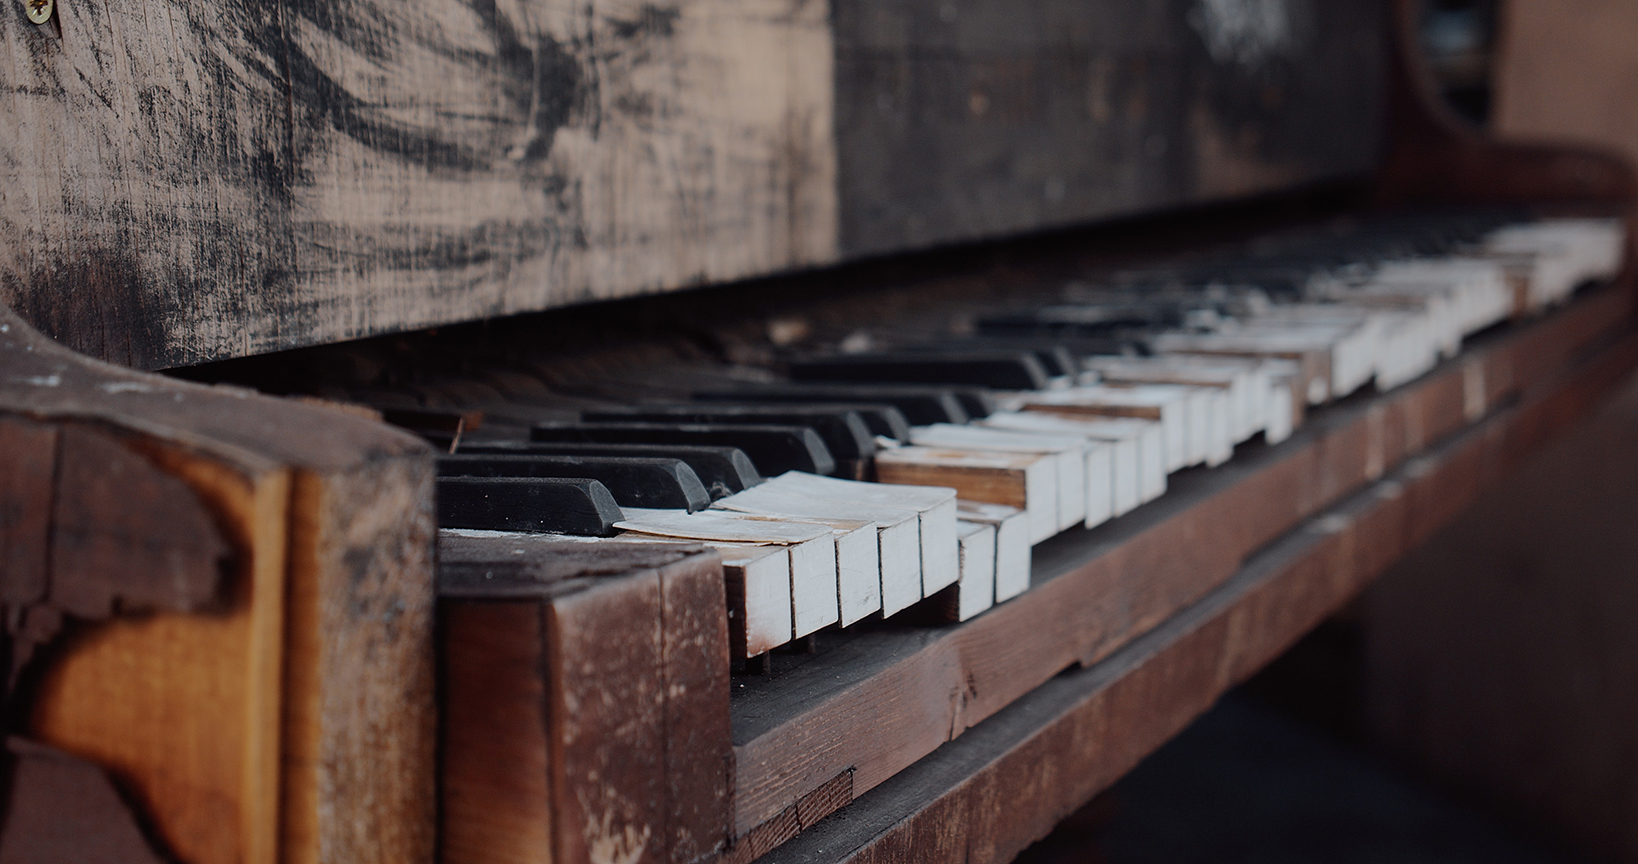 What I’ve Learned from My Piano